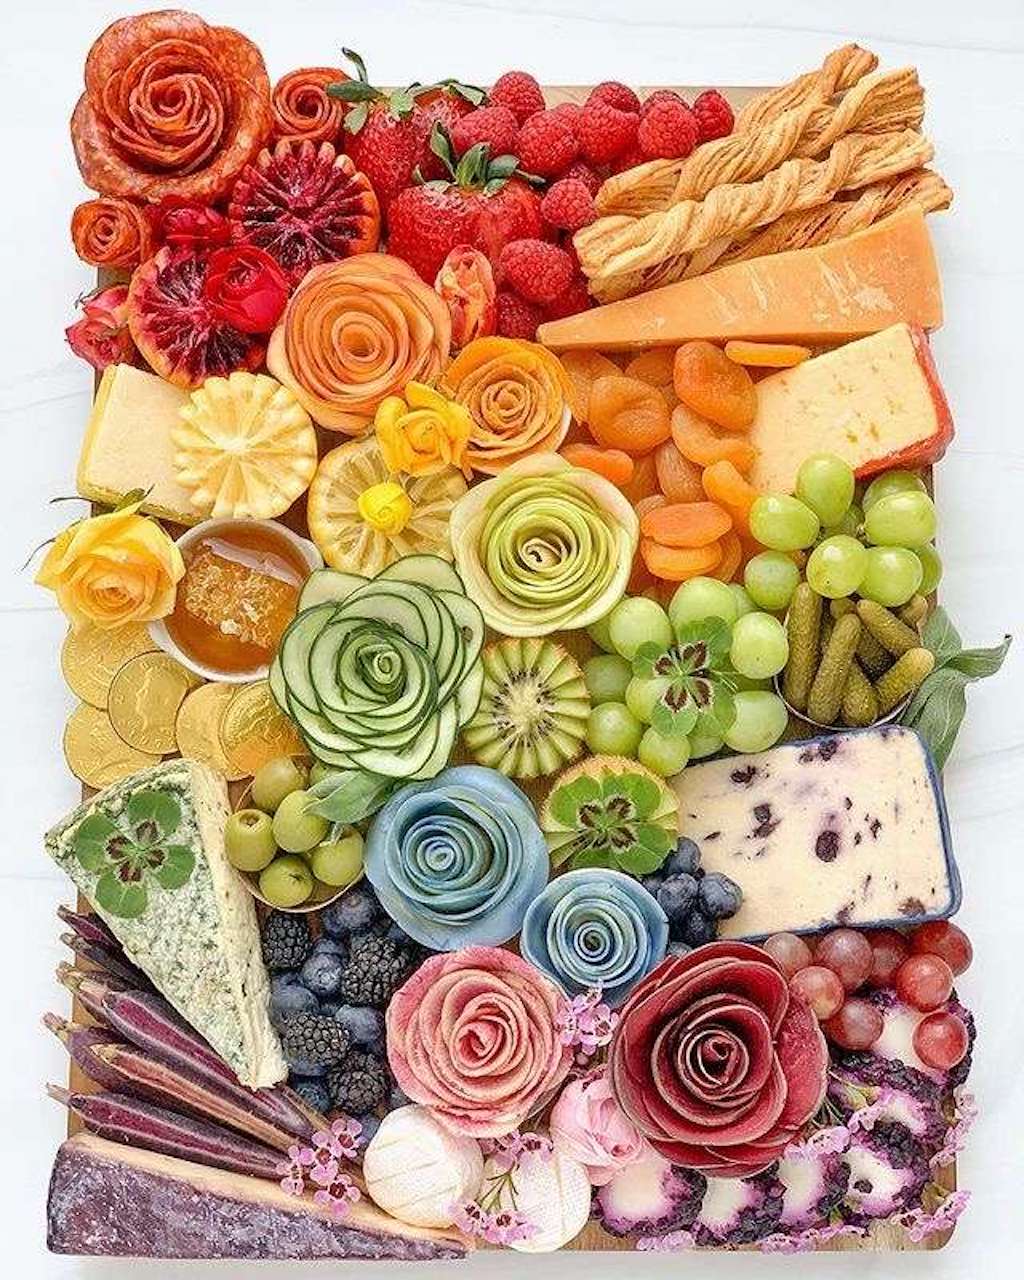 unique charcuterie boards ideas for the holidays rainbow flowers